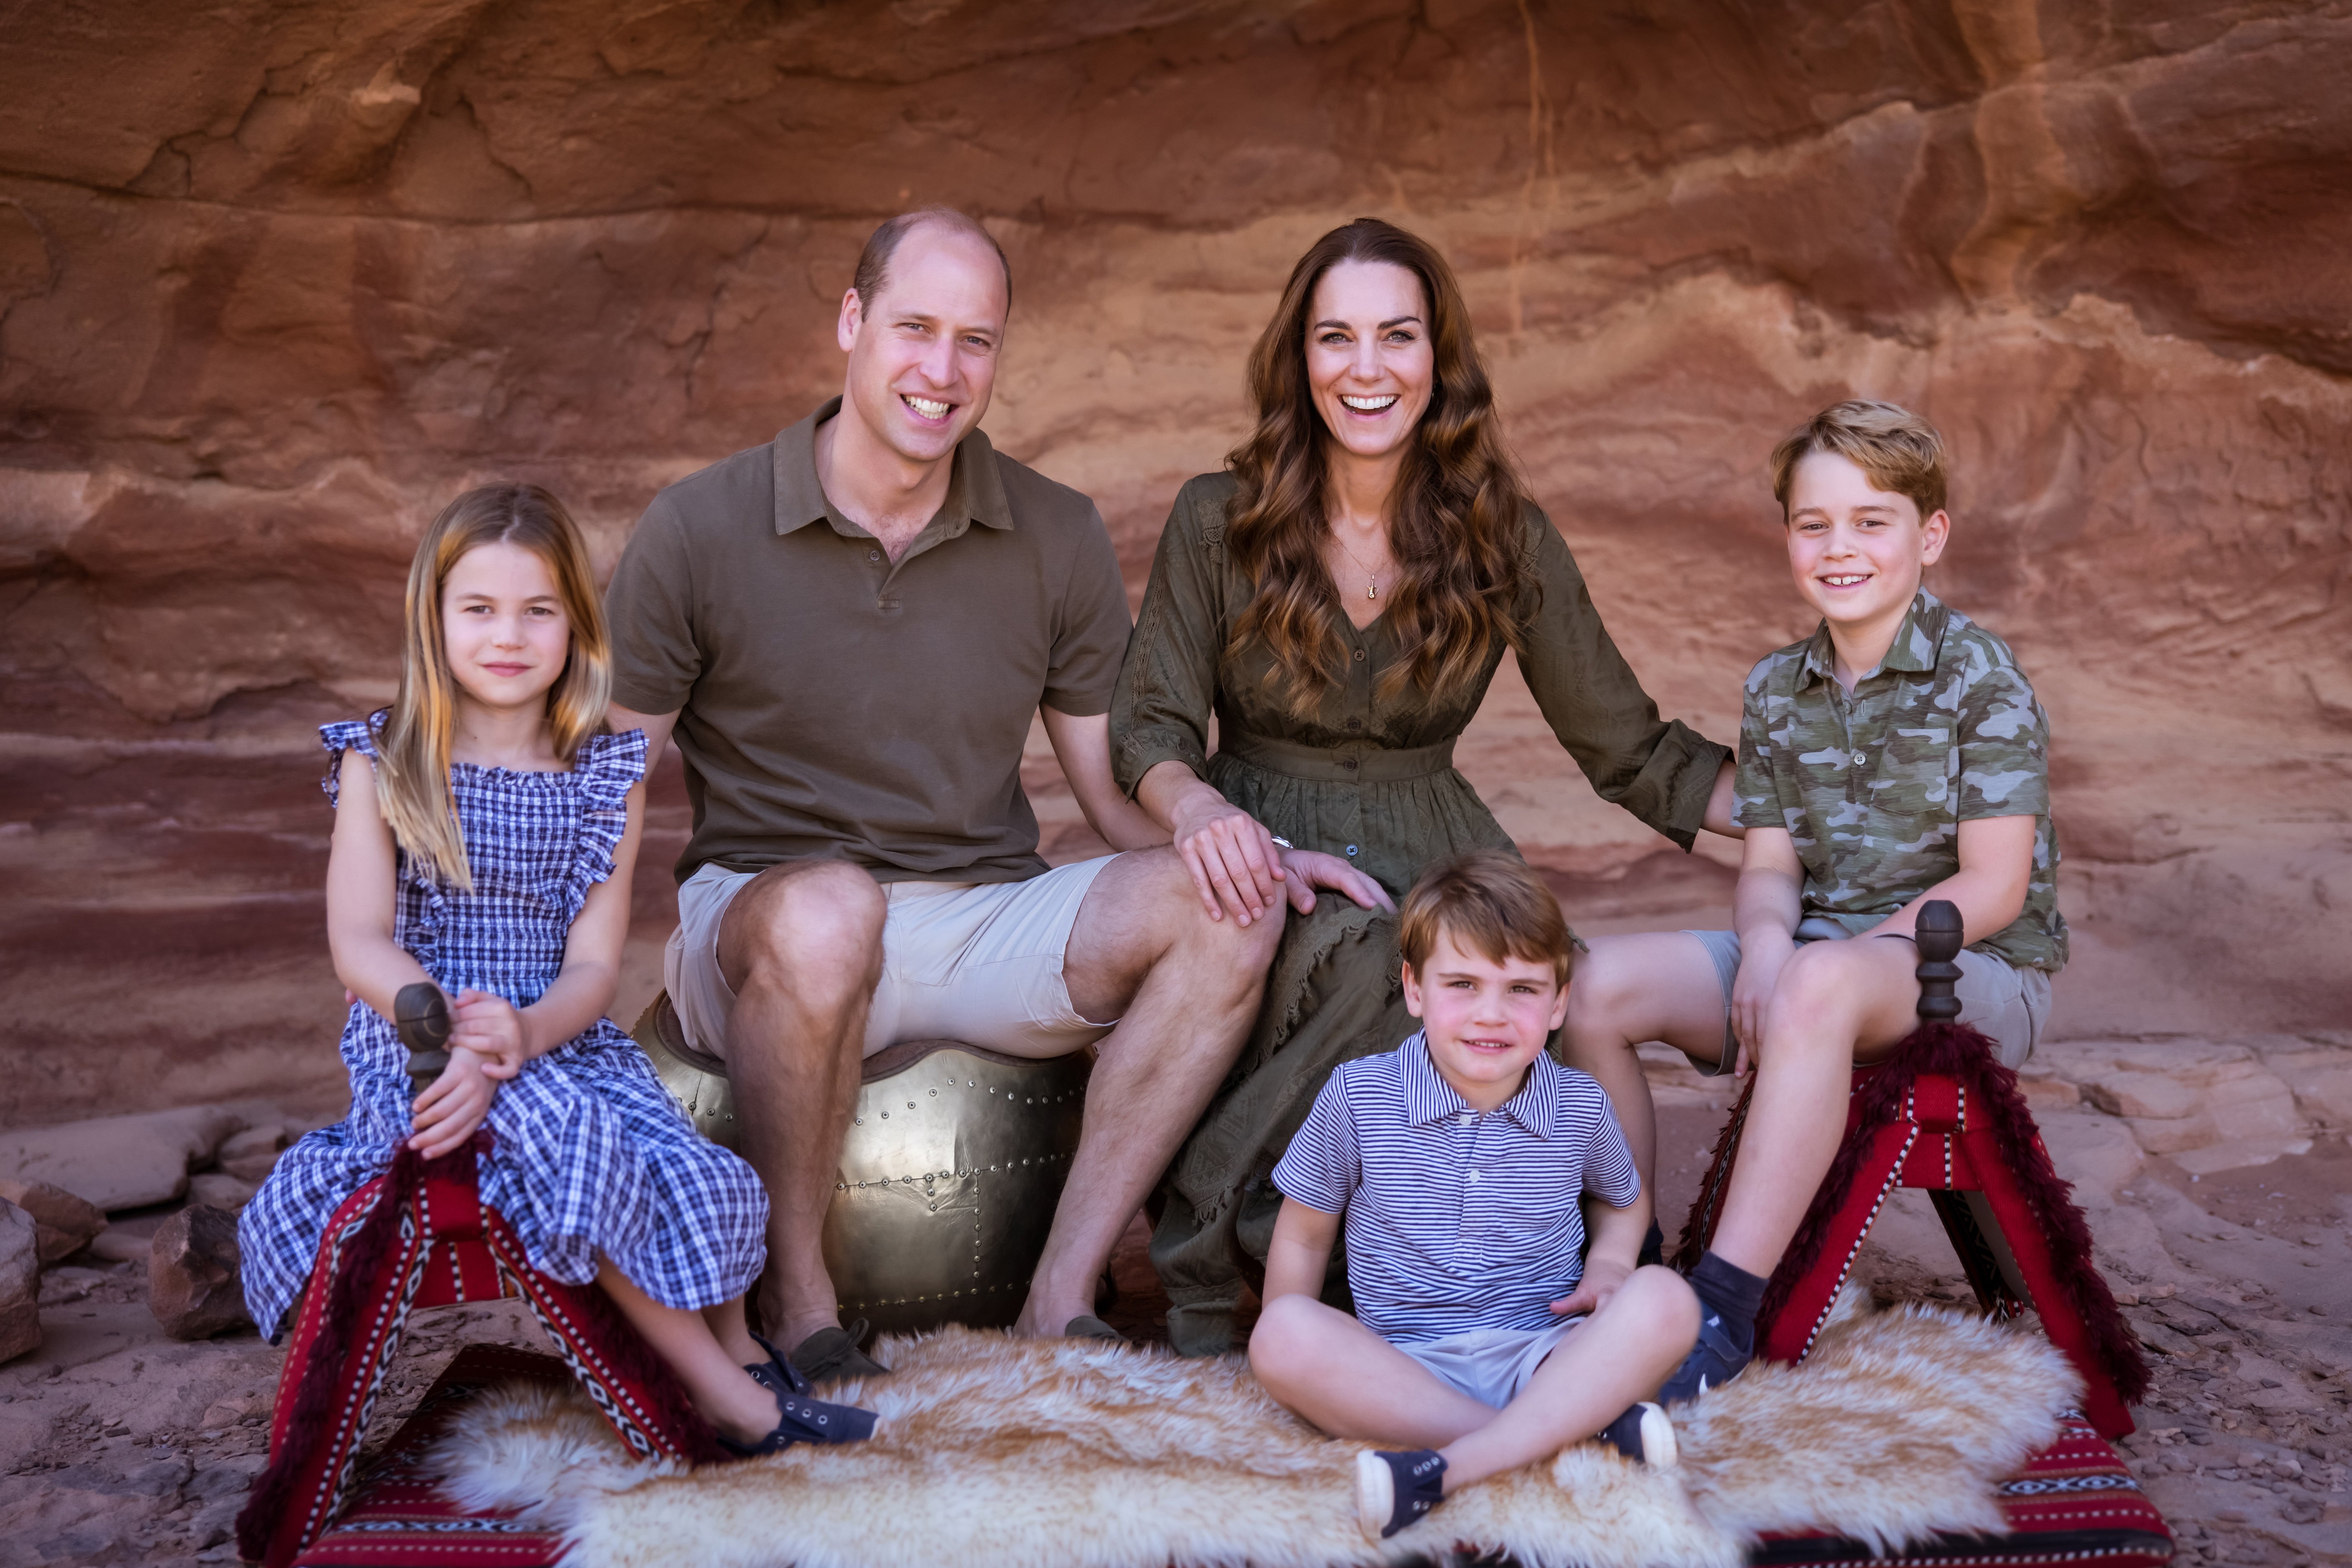 Princess Charlotte with her parents Prince William and Kate Middleton, and siblings Prince Louis and Prince George pictured on December 10, 2021 in Jordan. / Source: Getty Images